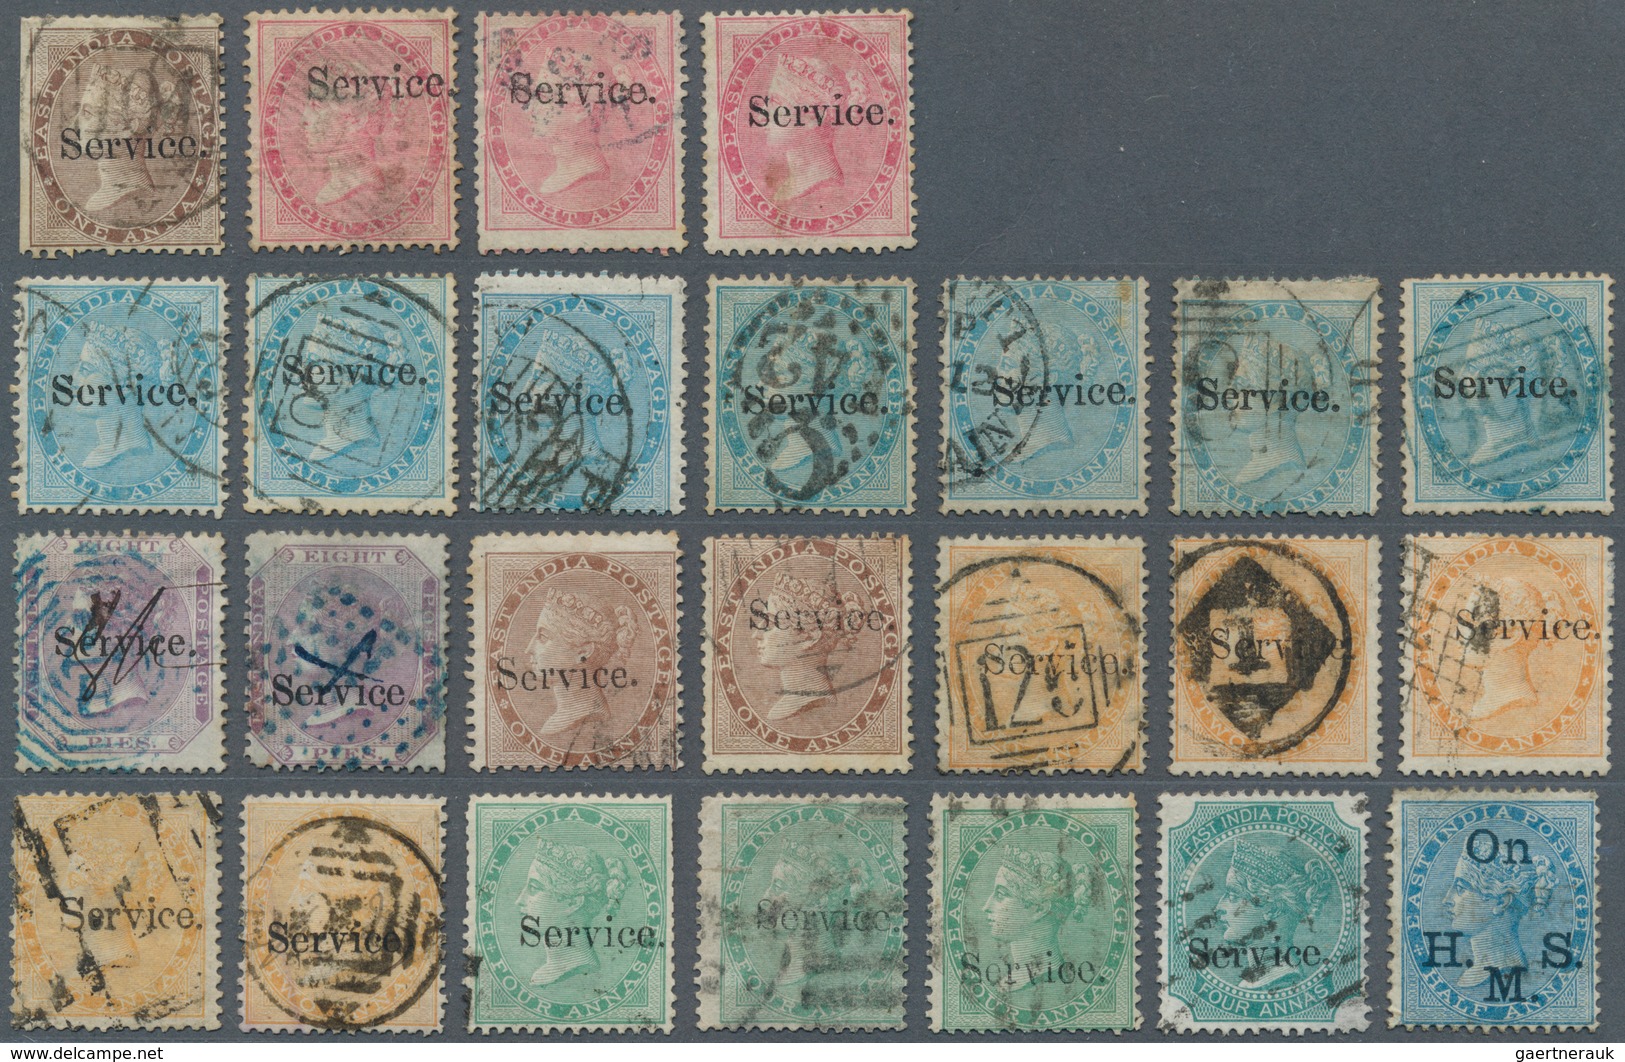 Indien - Dienstmarken: 1866-72, Group Of 24 QV Stamps With Small "Service." Overprint, Plus 1877 ½a. - Timbres De Service